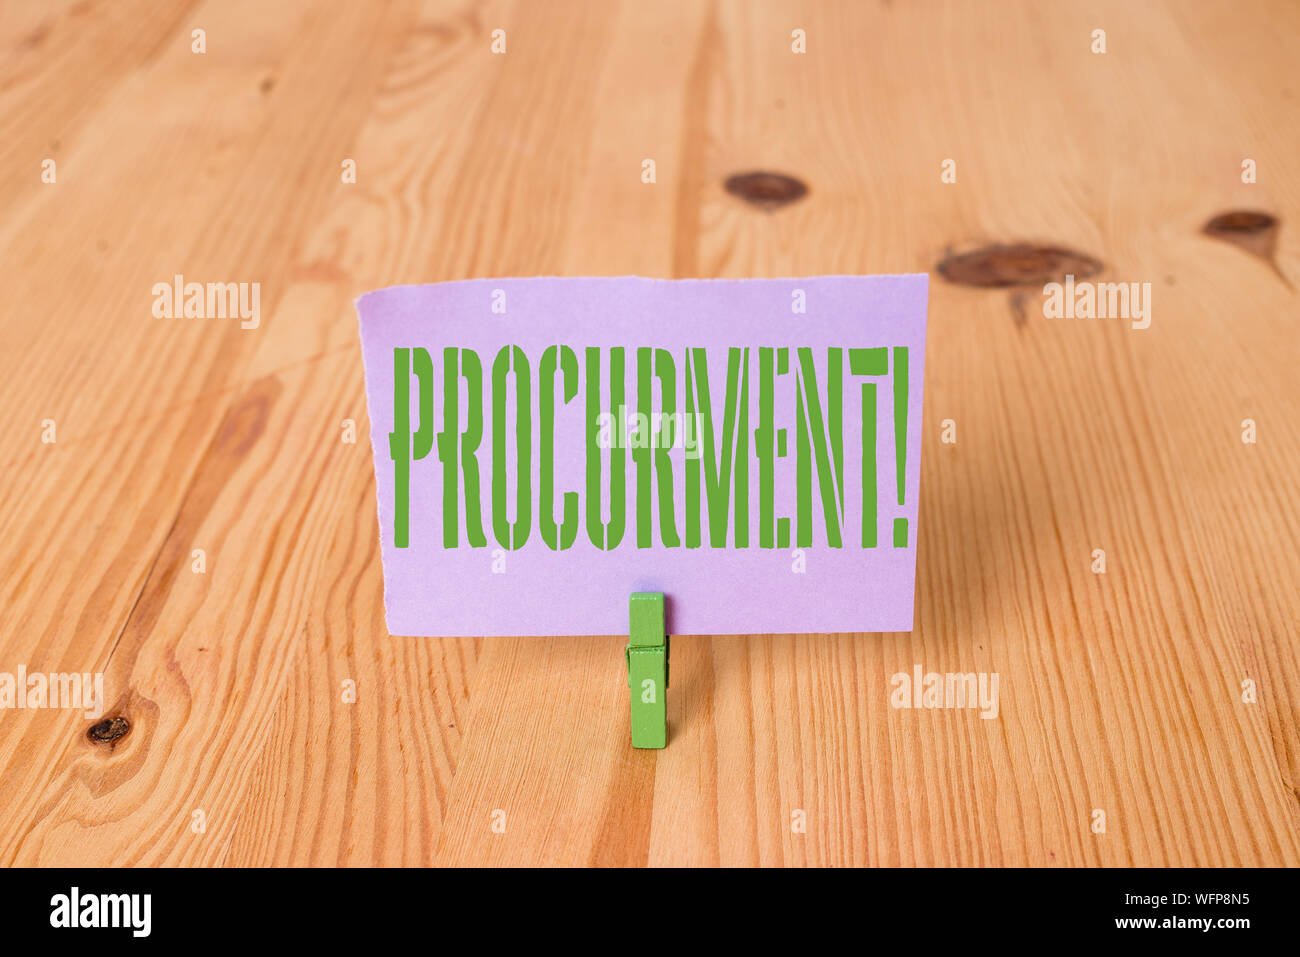 Writing note showing Procurment. Business concept for action of acquiring military equipment and supplies Wooden floor background green clothespin gro Stock Photo